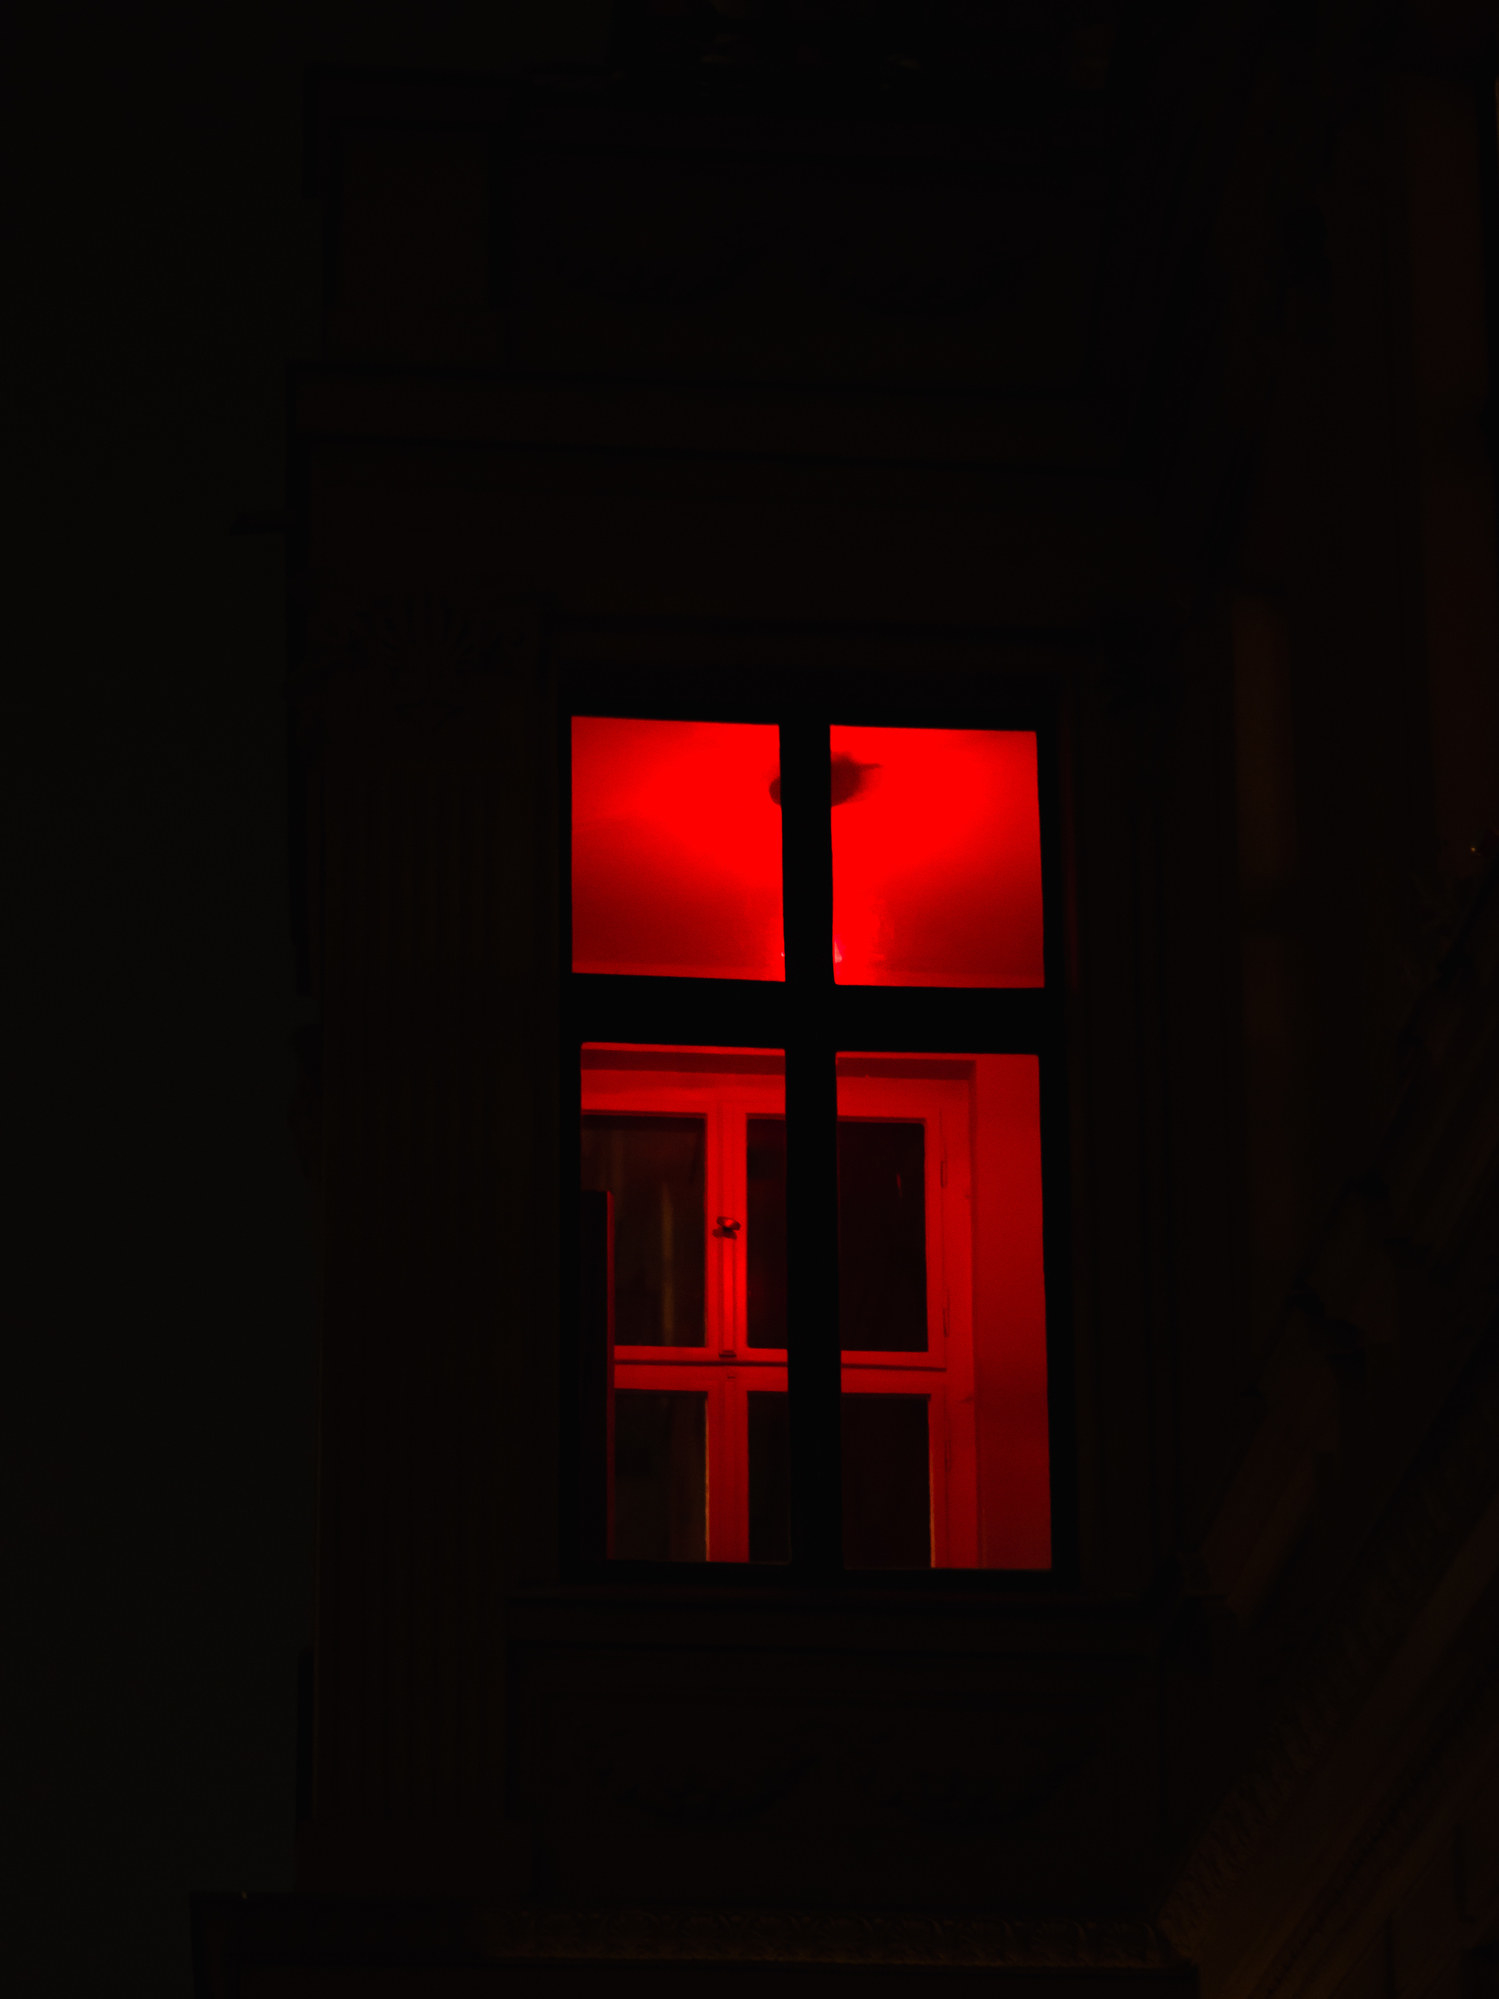 A room glows red at night